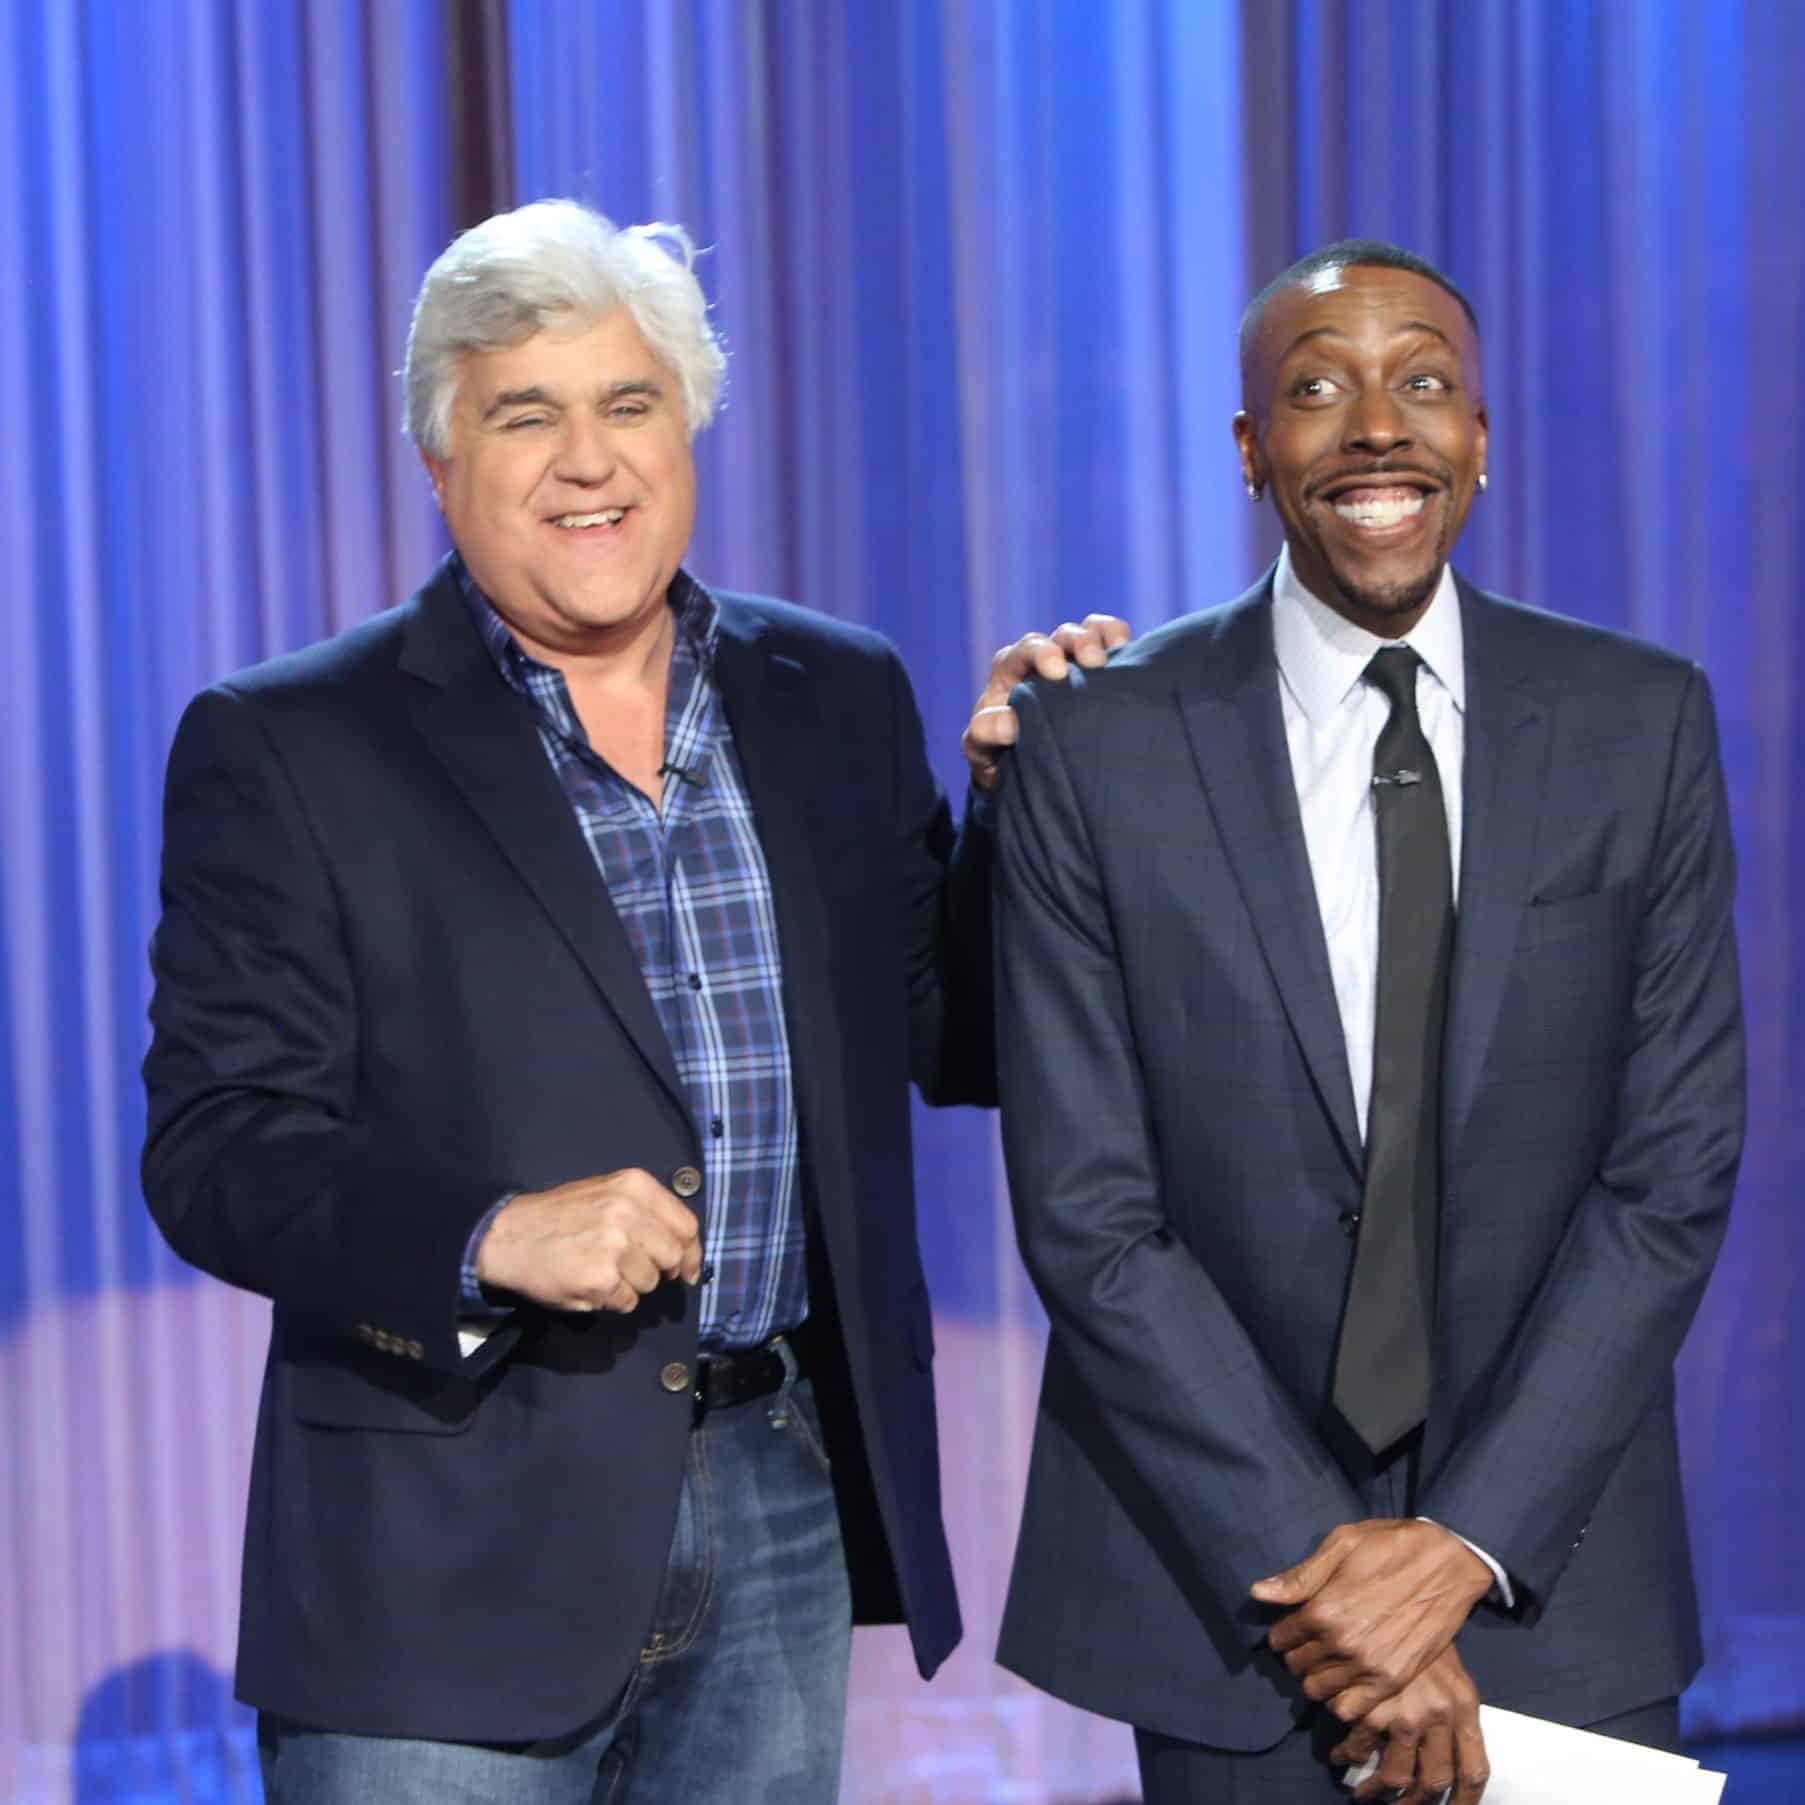 During the original run of "The Arsenio Hall Show," Arsenio Hall had a rivalry with Jay Leno